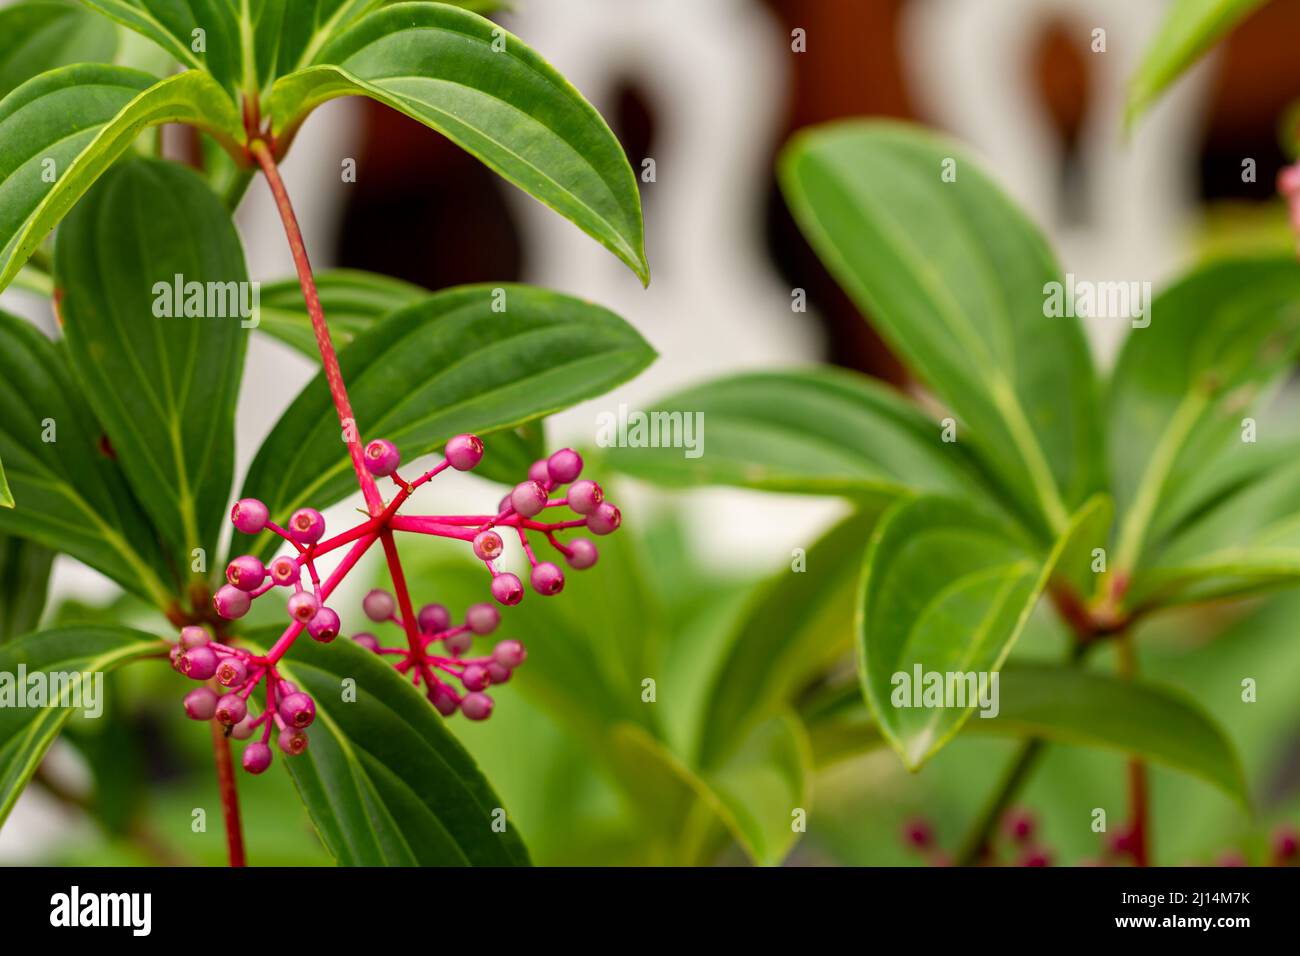 Medinilla plant with green leaves with round red flowers, blurred green foliage background, natural concept Stock Photo